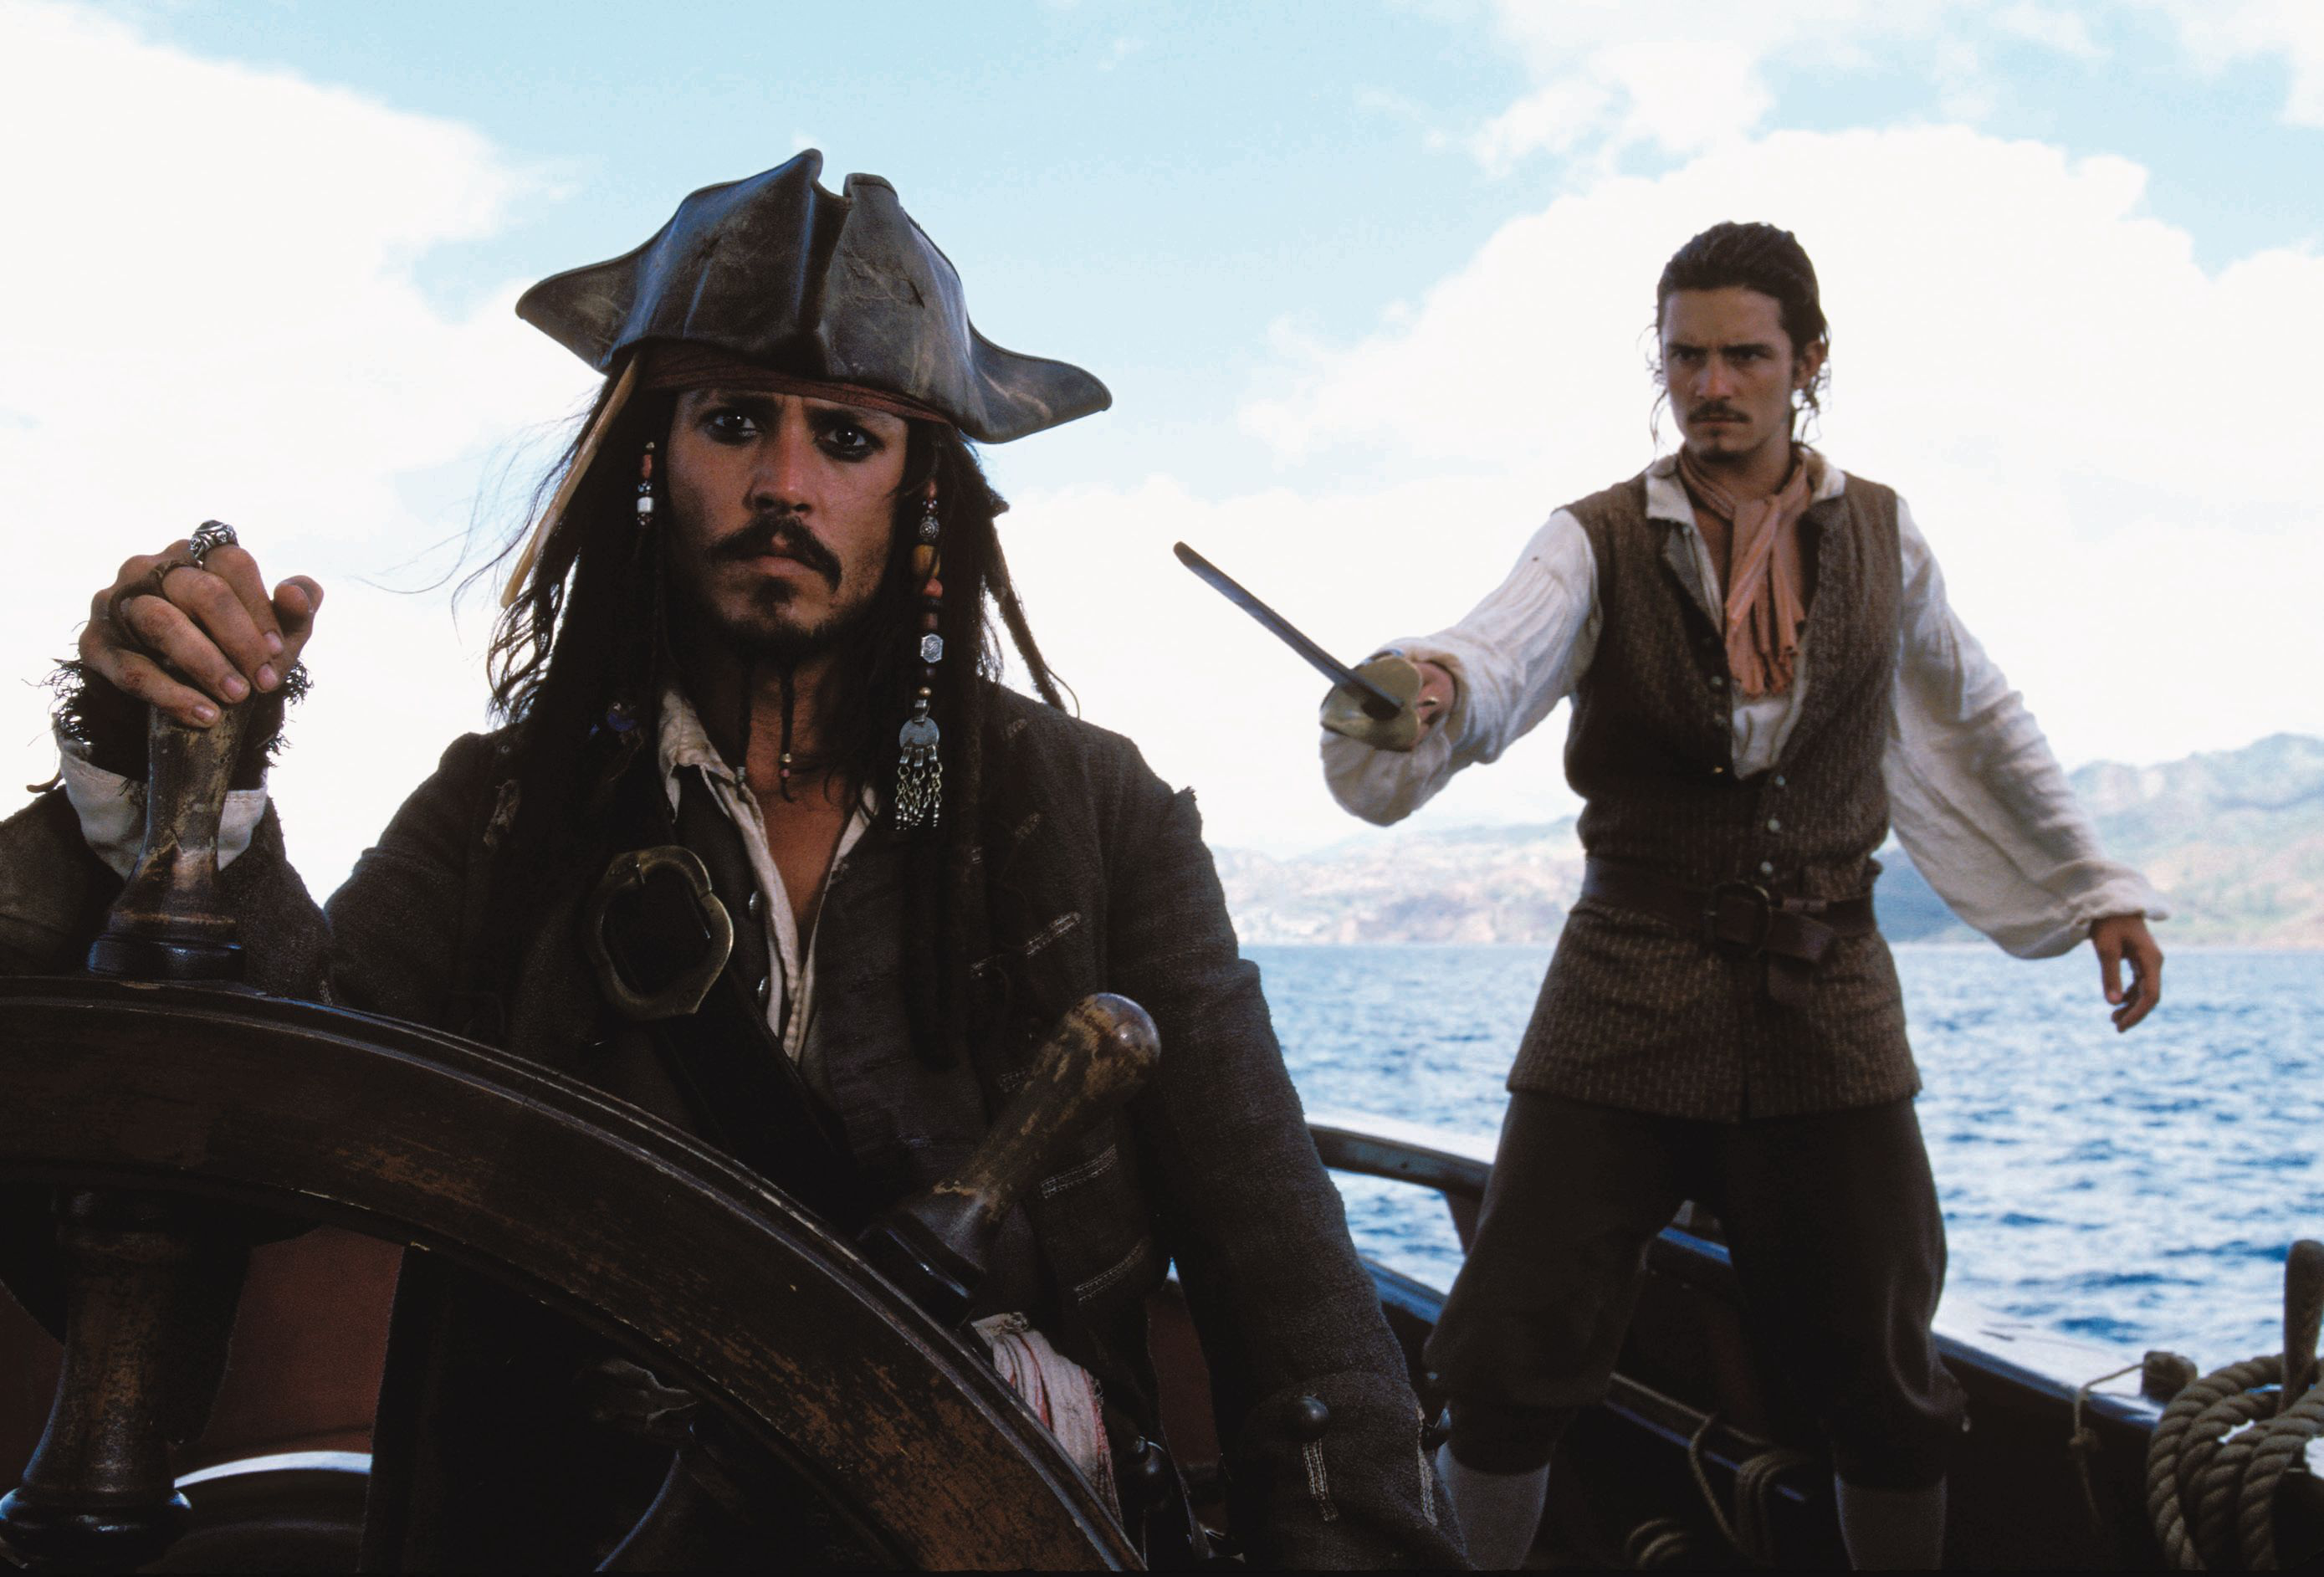 pirates of the caribbean: the curse of the black pearl, pirates of the caribbean, movie, jack sparrow, johnny depp, orlando bloom, will turner download HD wallpaper